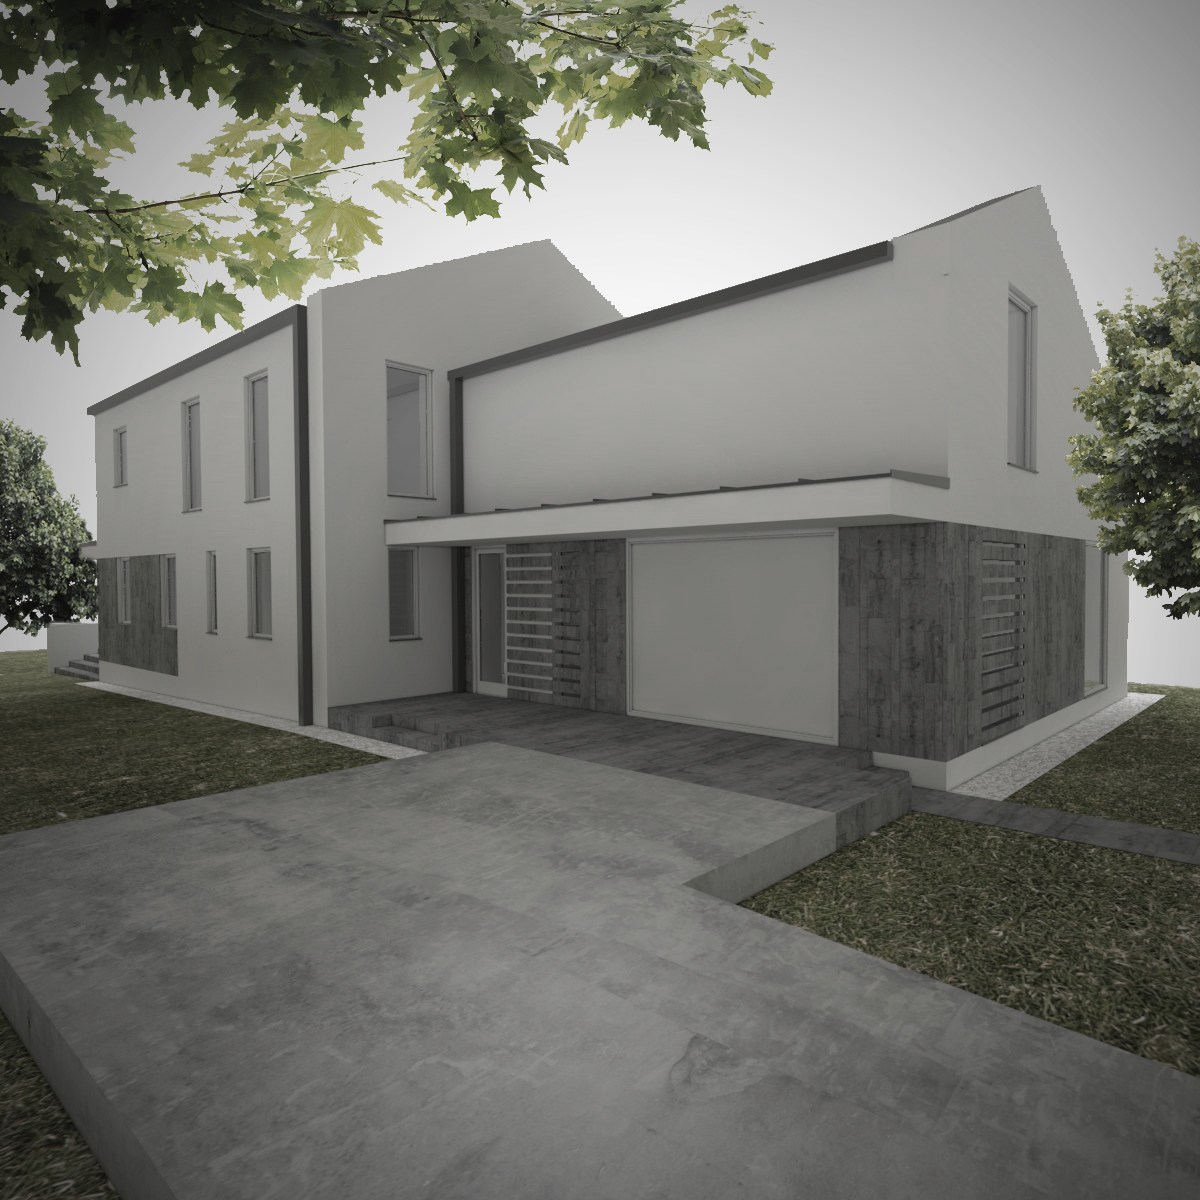 01_Ringlo house